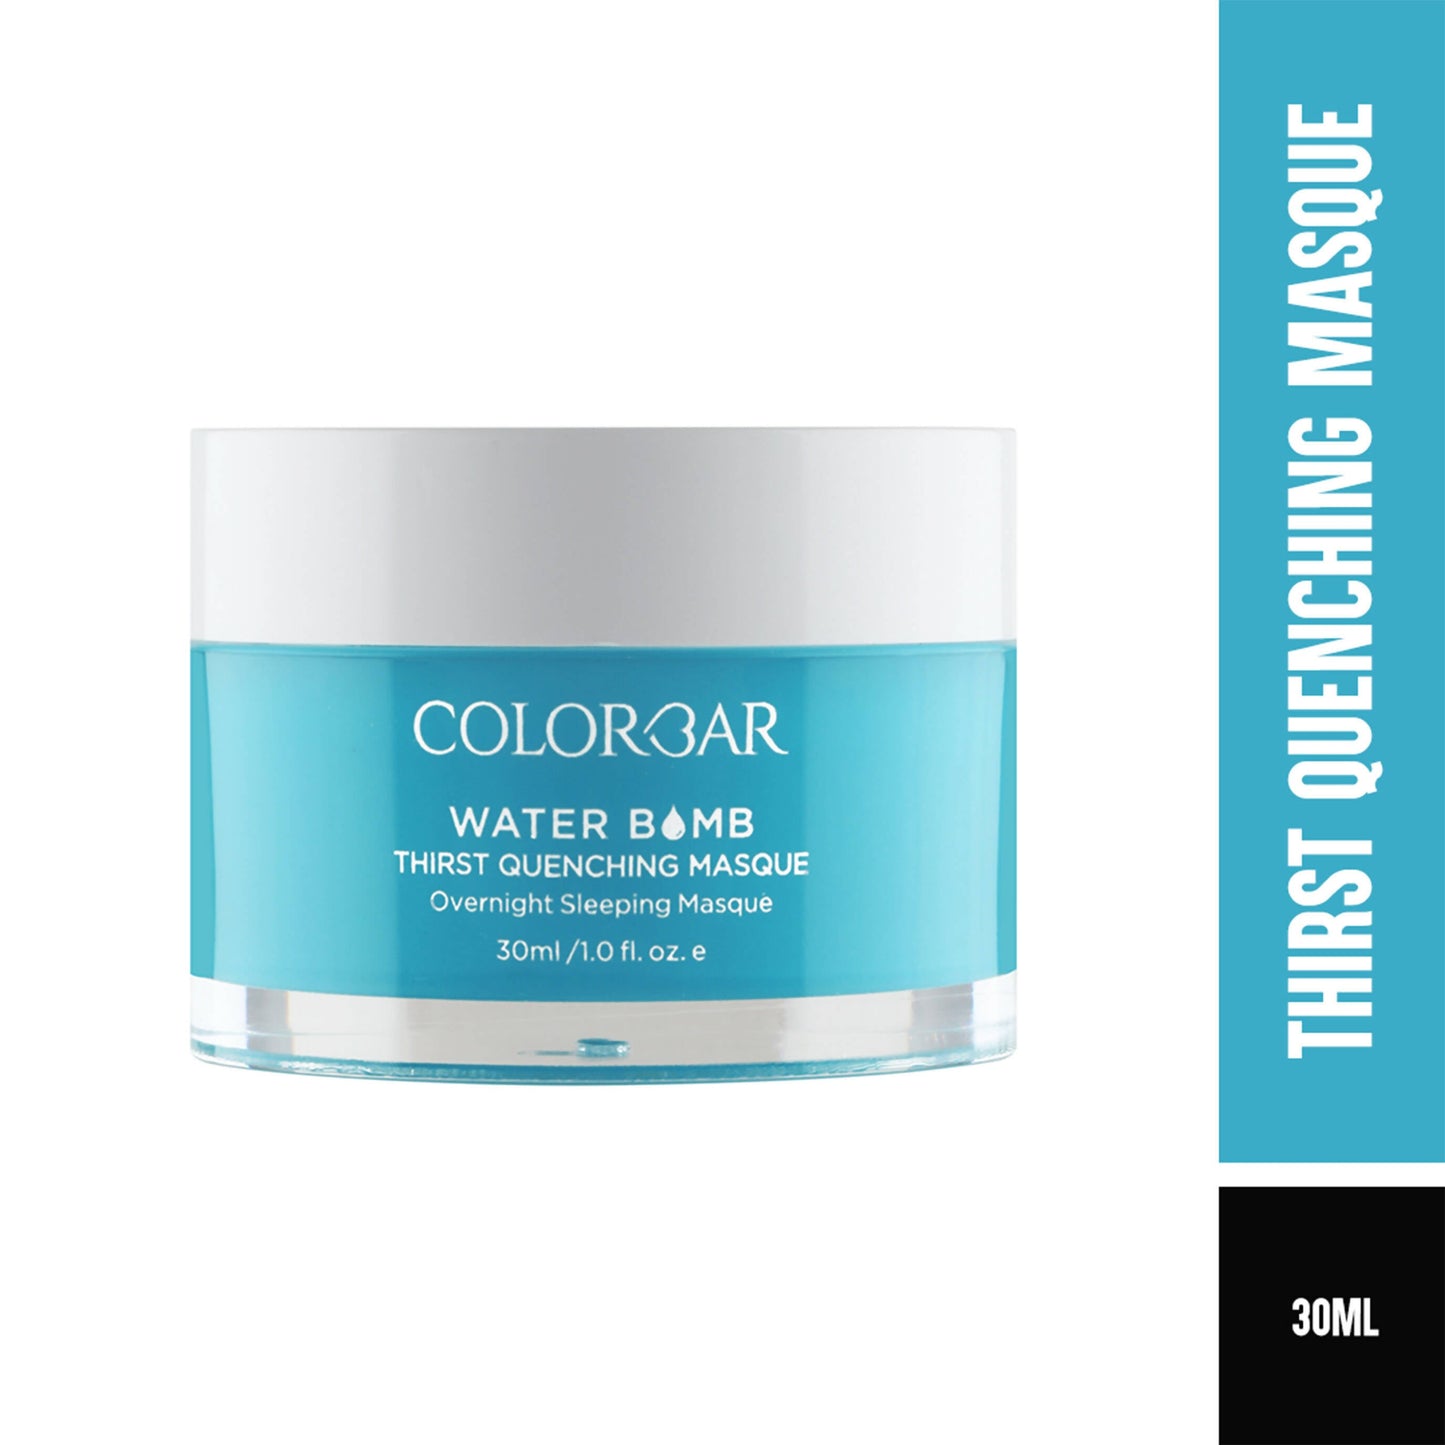 Colorbar Water Bomb Thirst Quenching Masque